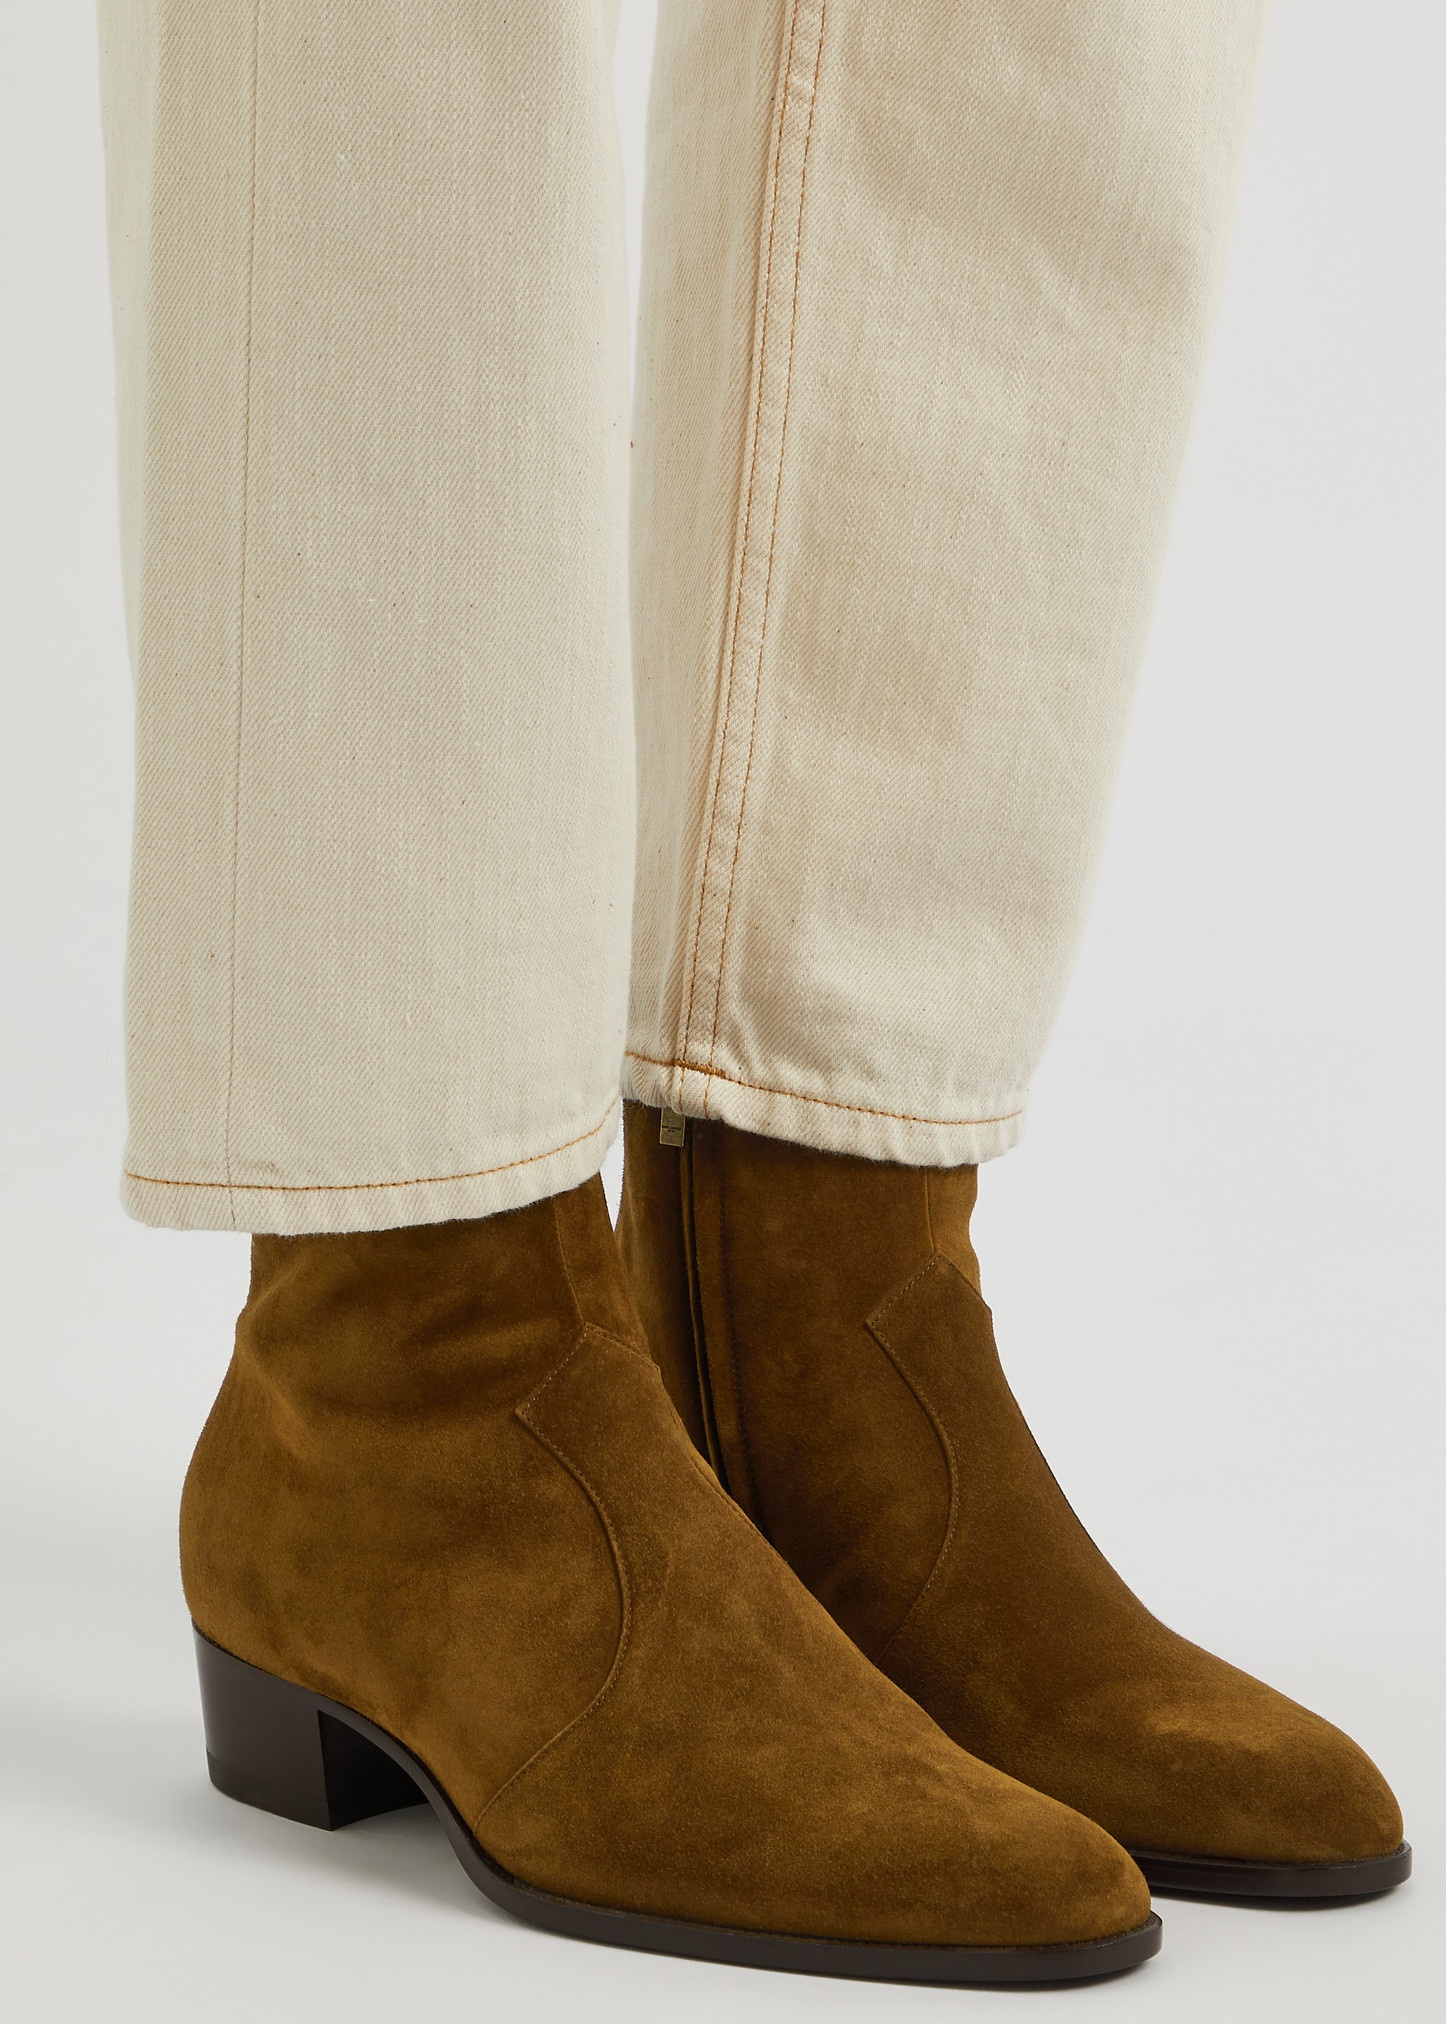 Wyatt 40 suede ankle boots - 5